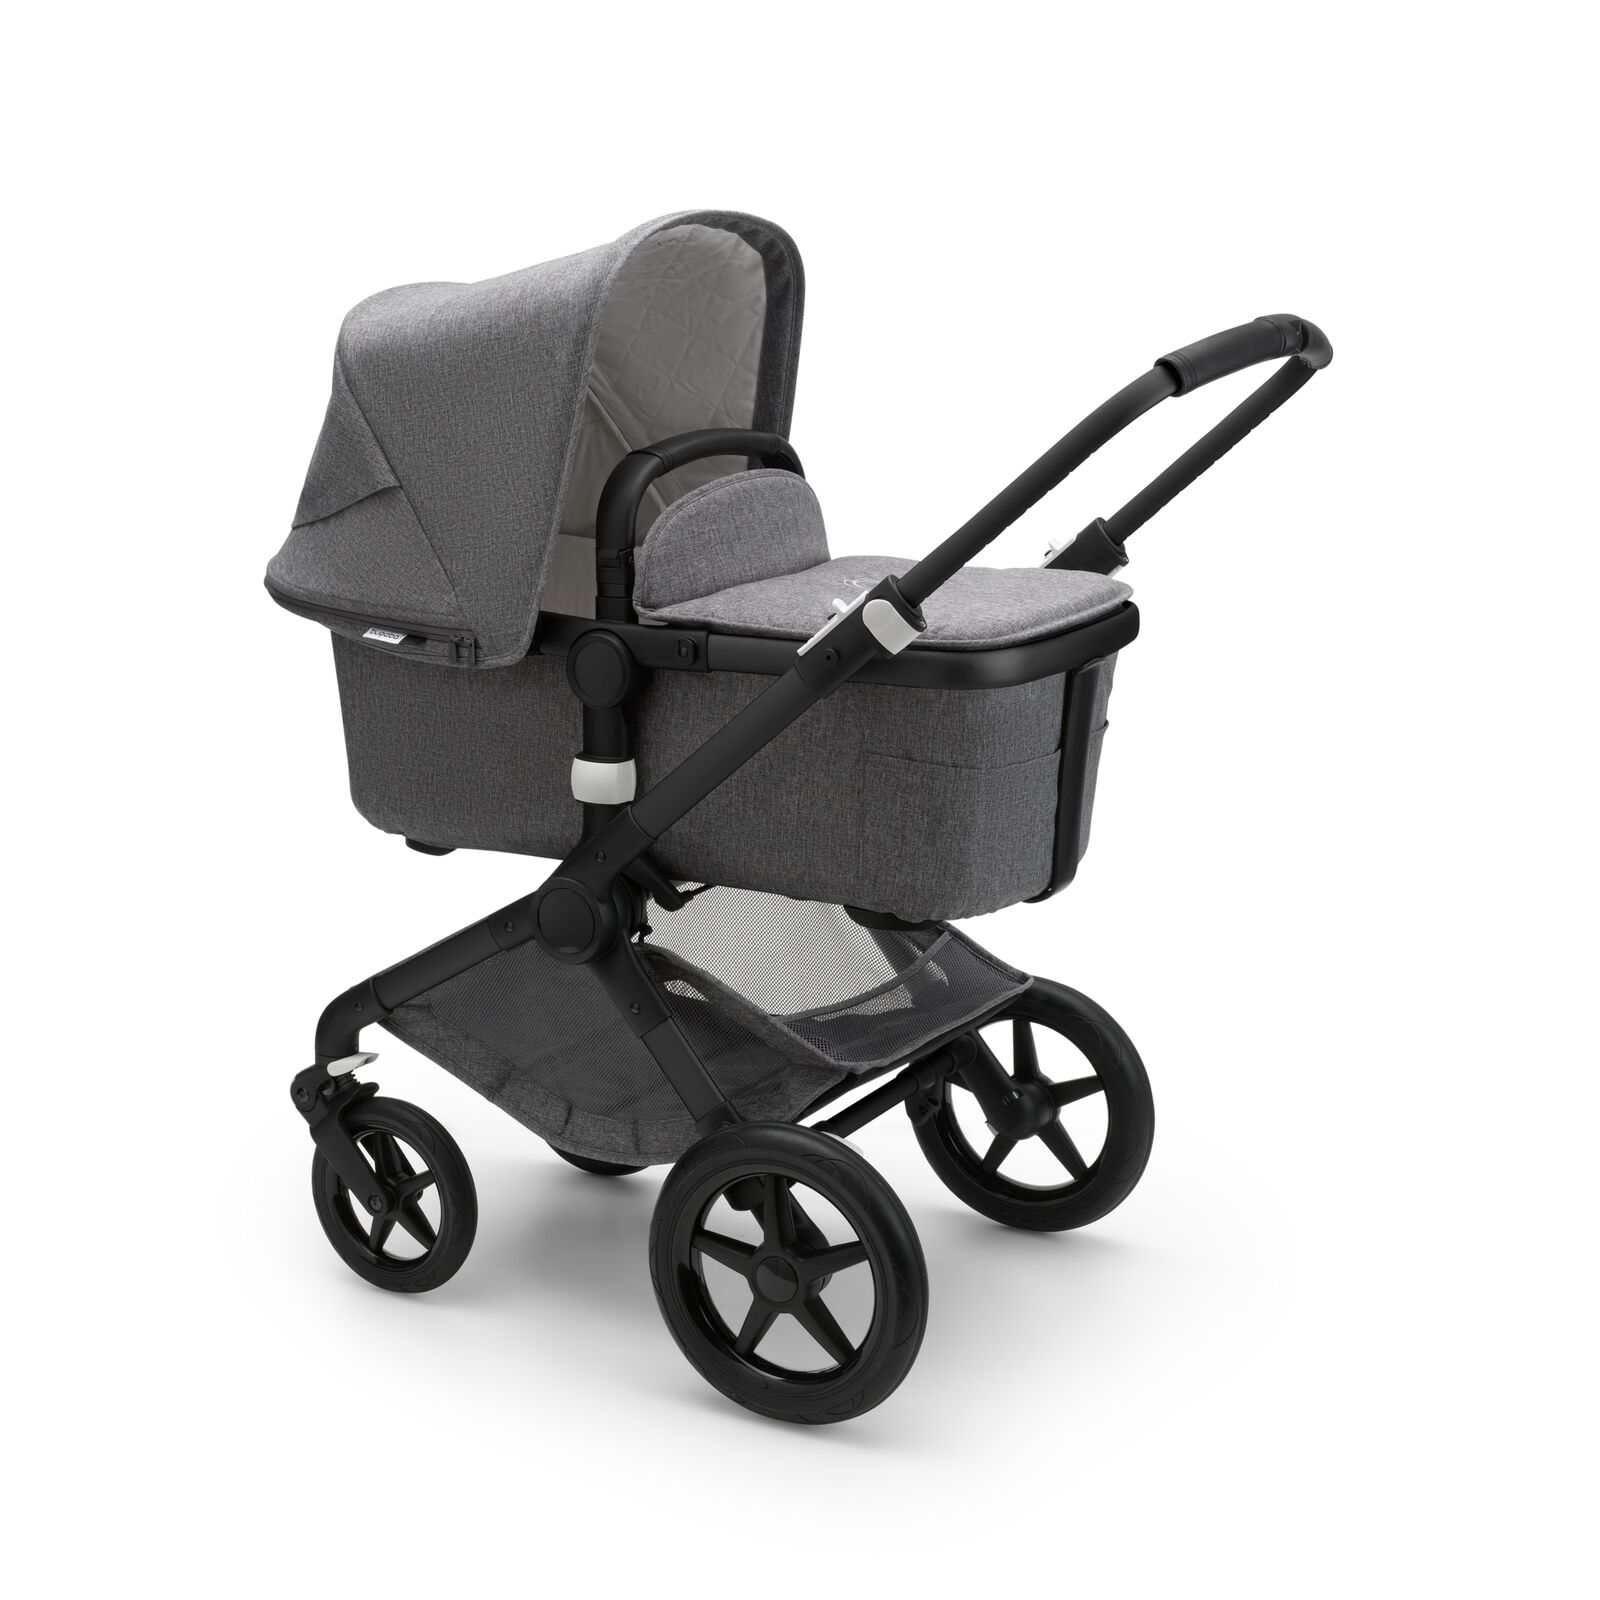 Bugaboo Fox 2 seat and bassinet stroller